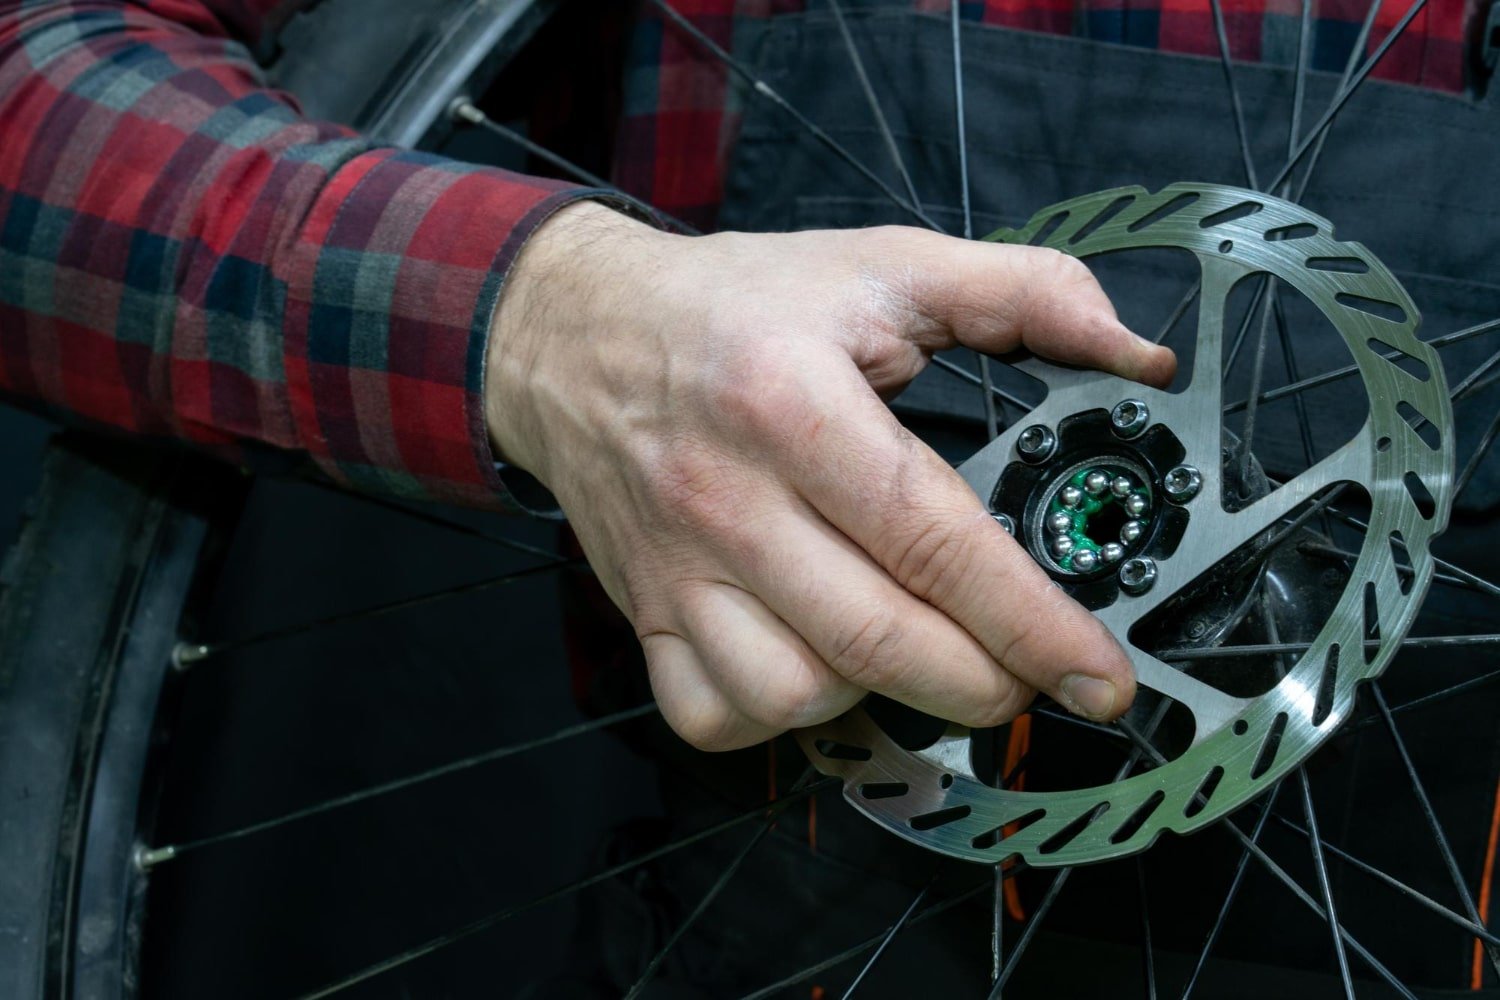 Cycle Gear Direct Gear Up for Your Next Ride